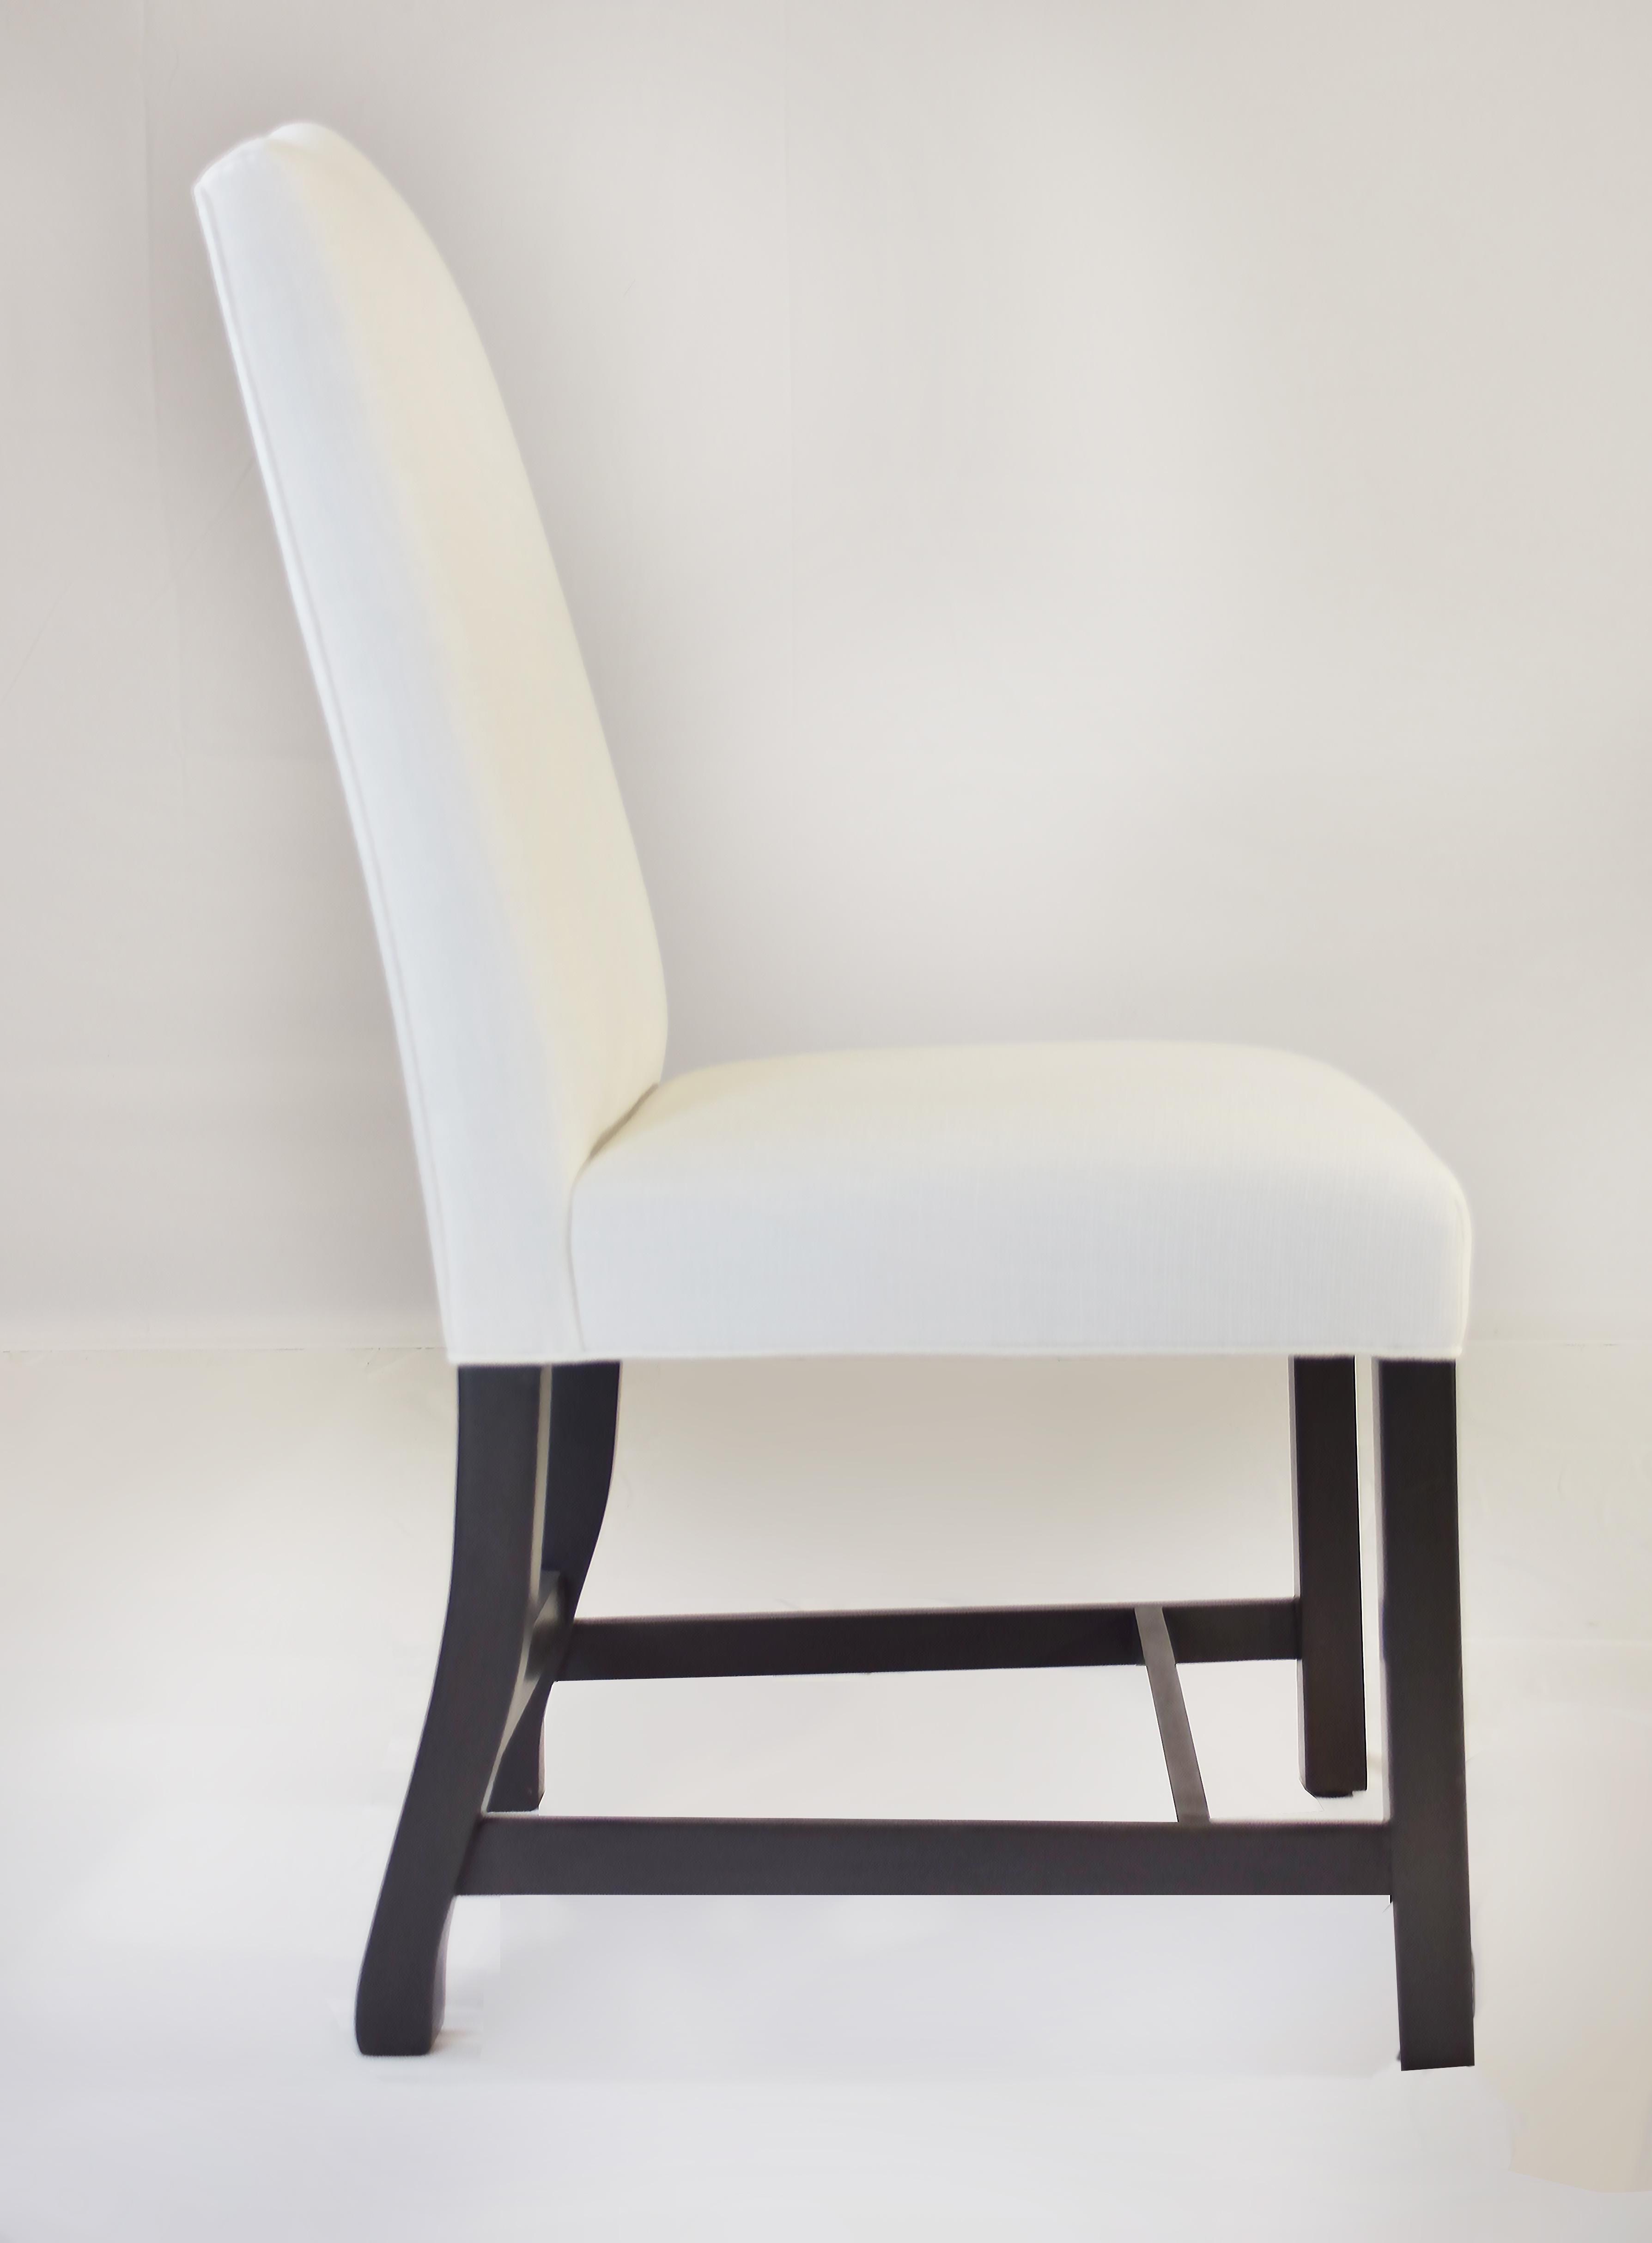 Contemporary Le Jeune Upholstery Hampshire Armless Dining Side Chair DC1.923 Showroom Model For Sale